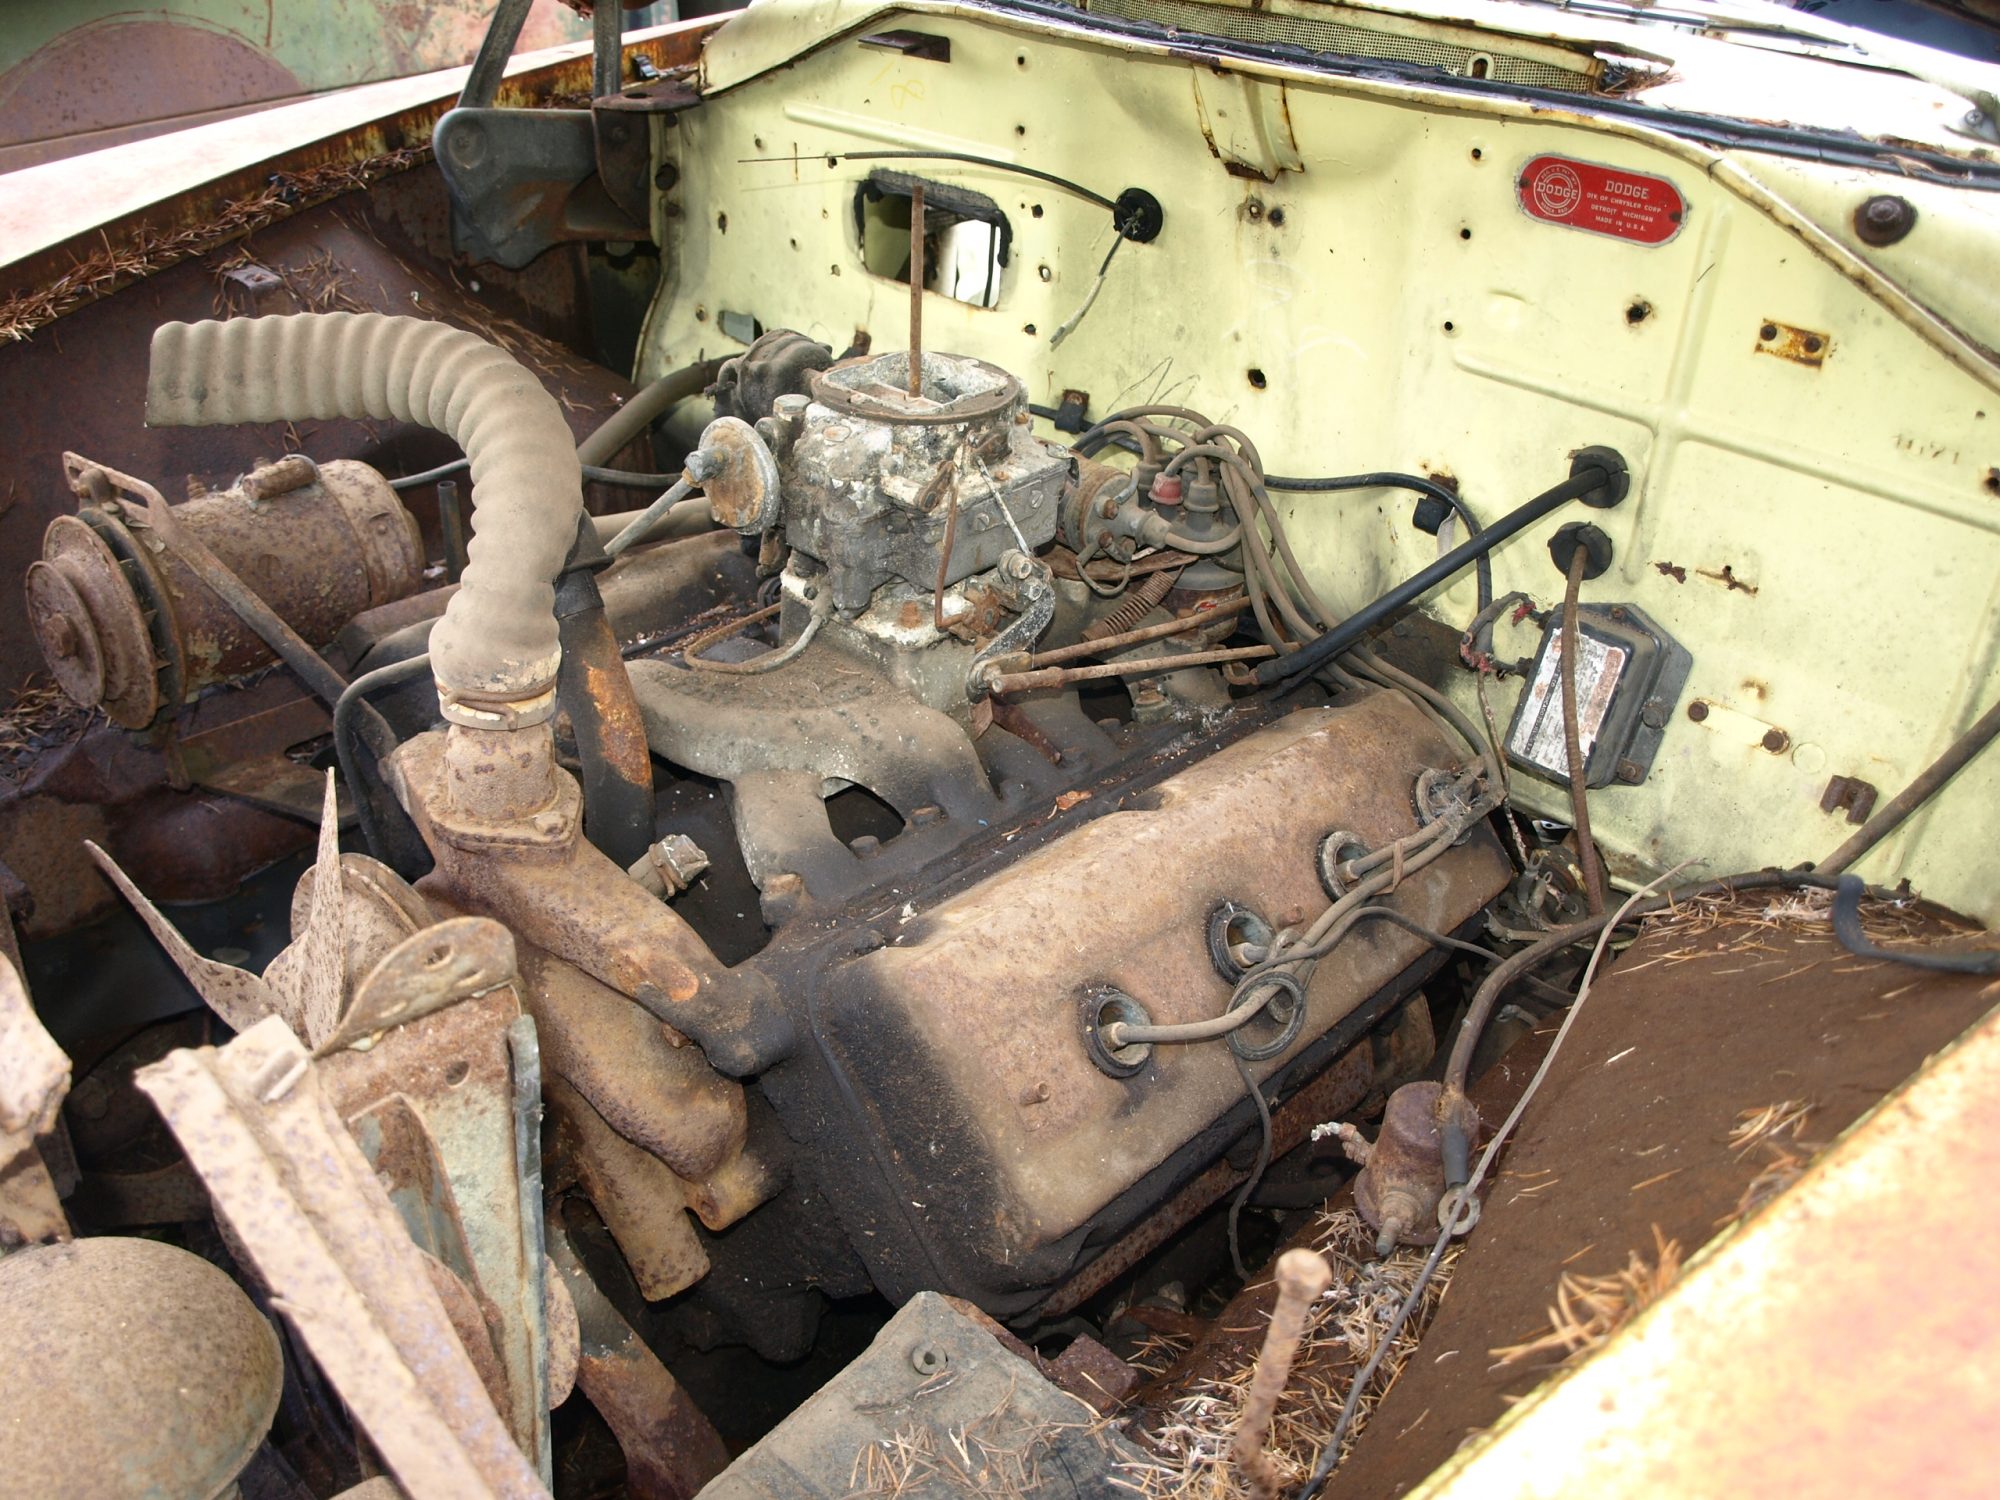 Engine in an old car